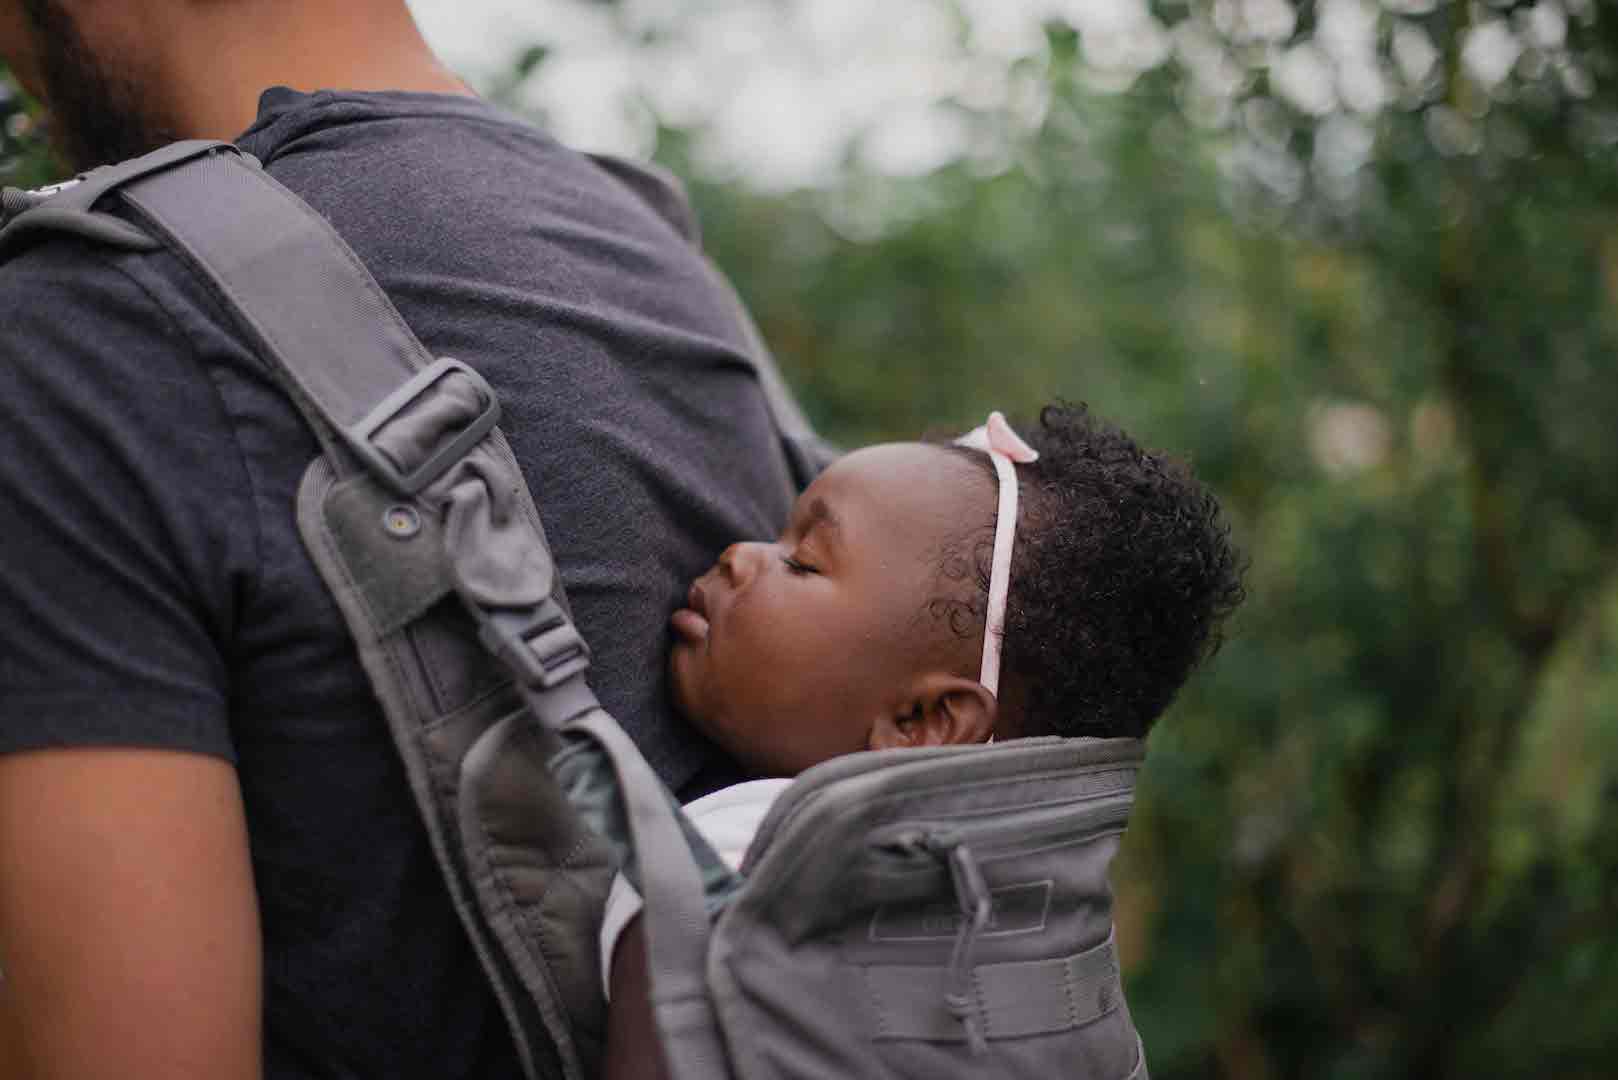 is it safe for baby to sleep in baby carrier